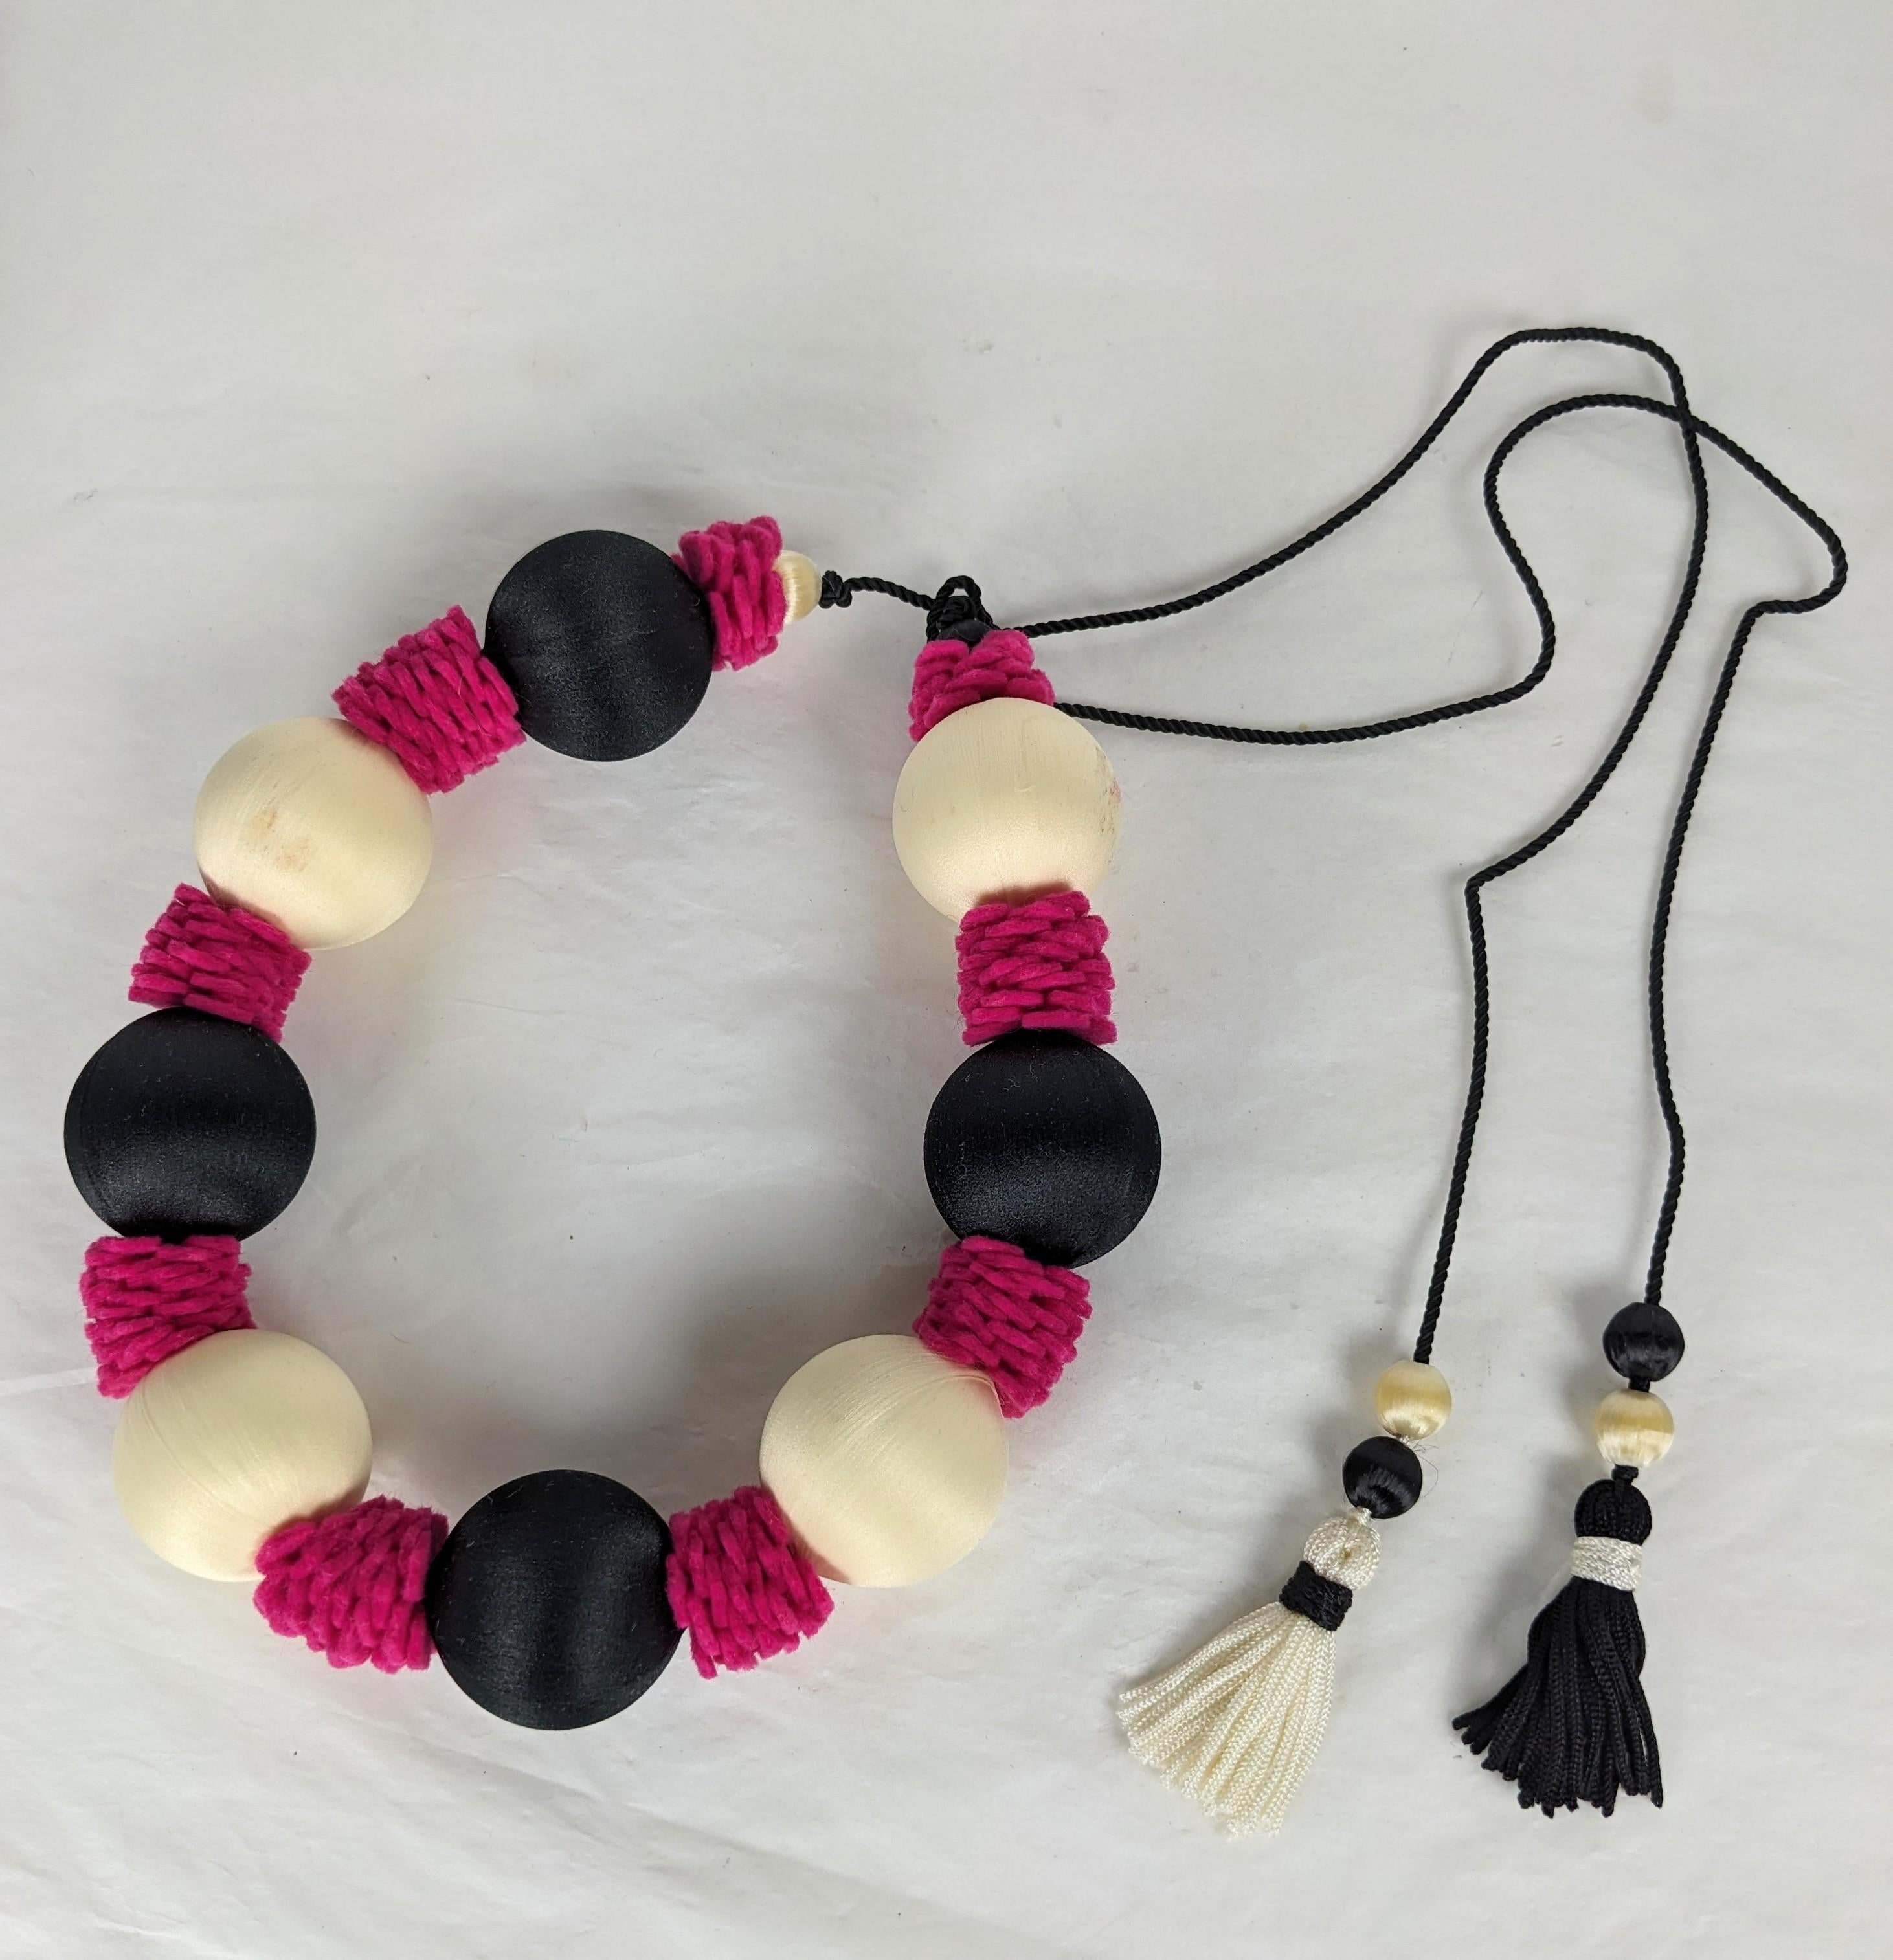 Yves Saint Laurent  Passementerie Necklace , Haute Couture Spring Summer 1977 Spanish Collection. Composed of large and small silk sateen white and black beads and bright shocking pink felted wool. Silk cord ties with tassel ends. Excellent